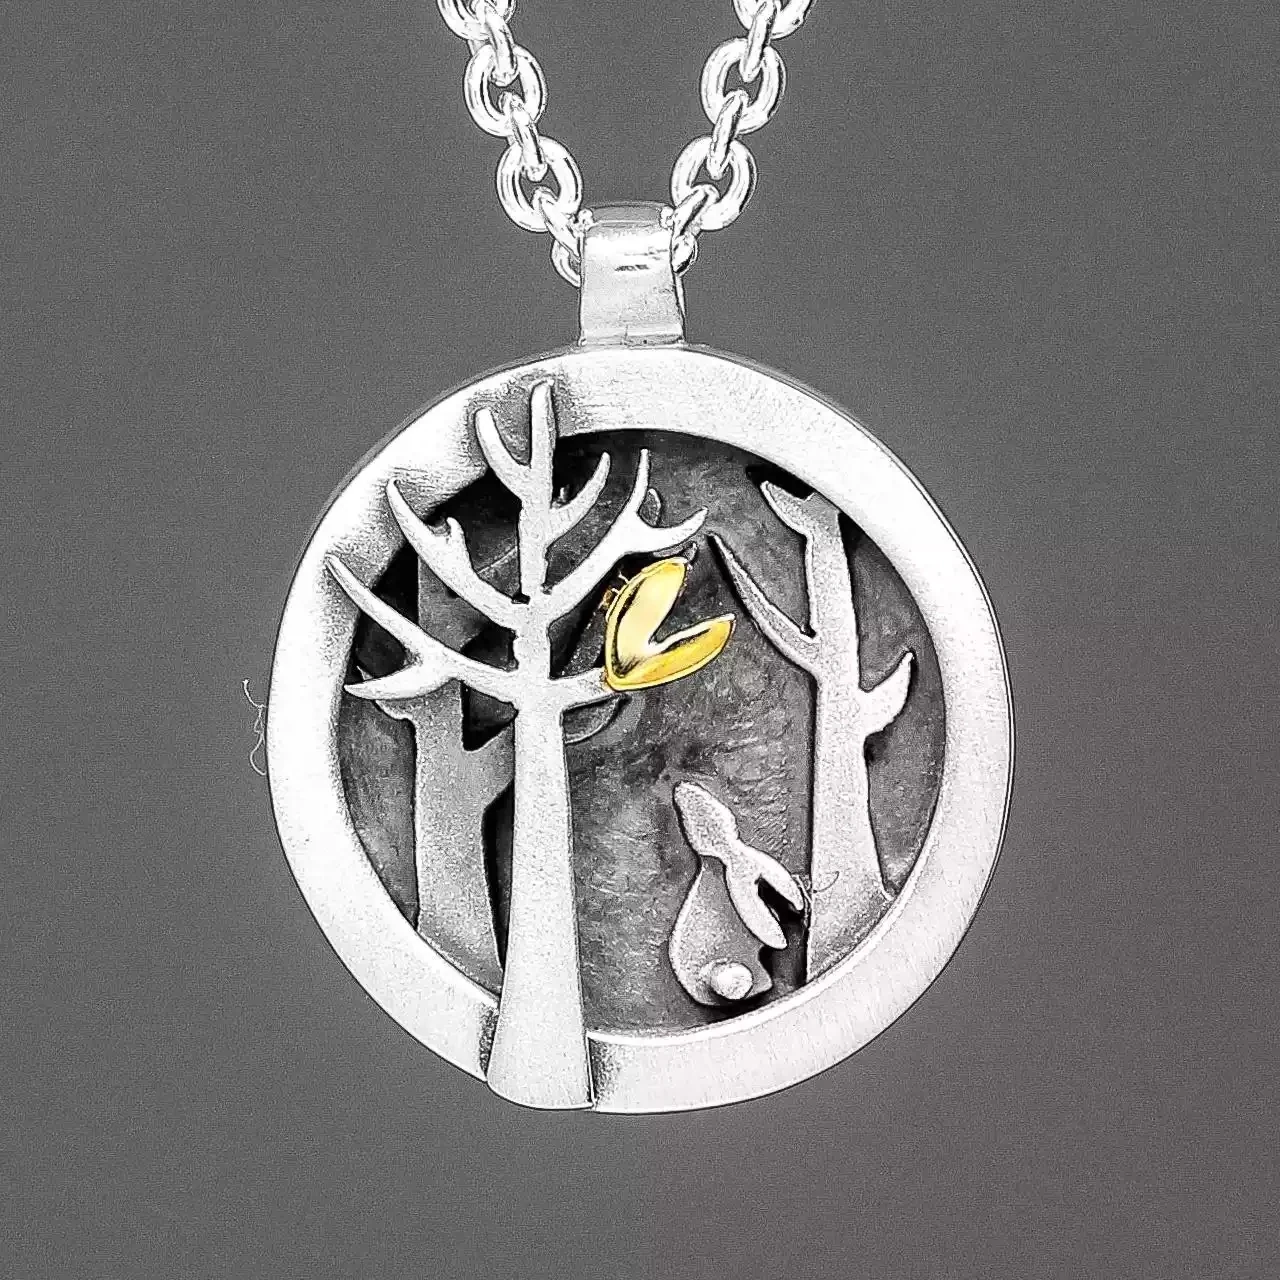 Woodlands Hare and Heart Silver and Gold Necklace - Medium by Linda Macdonald